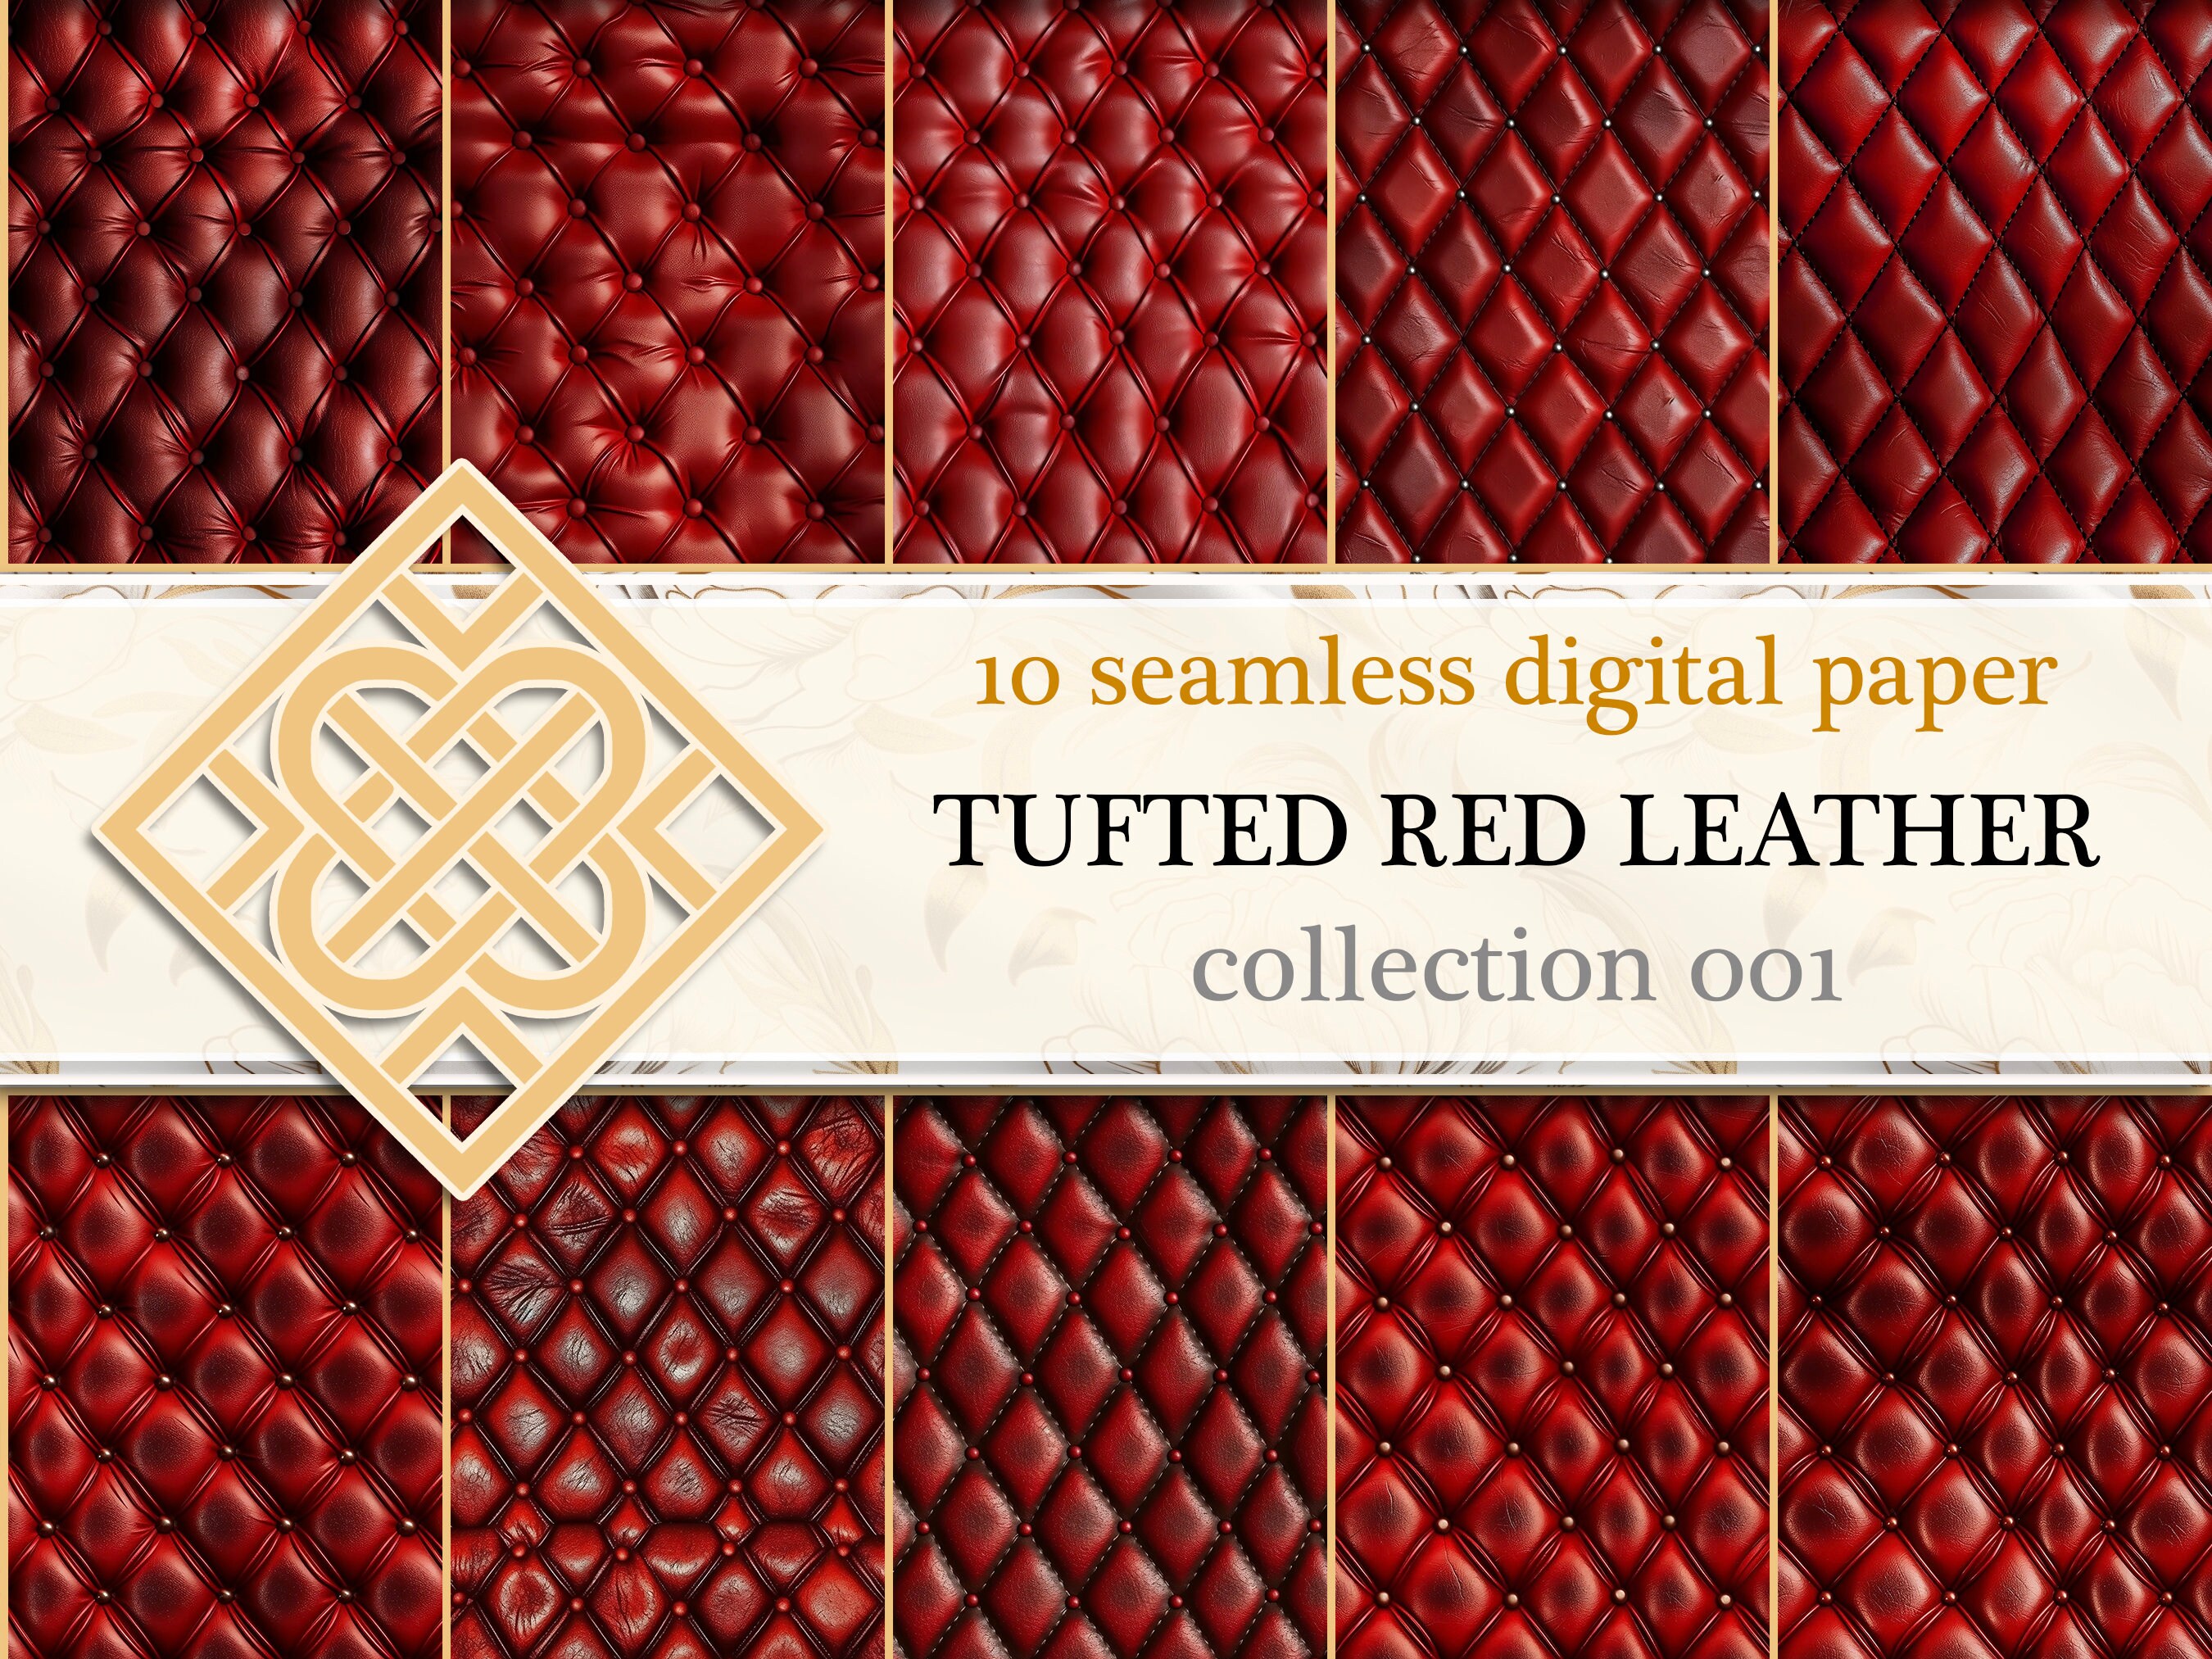 5x7 Diamond Tufted Backgrounds, Tufted Digital Paper, Quilted Luxury  Textures, Button Quilting Digital Paper, Invitation Backgrounds 